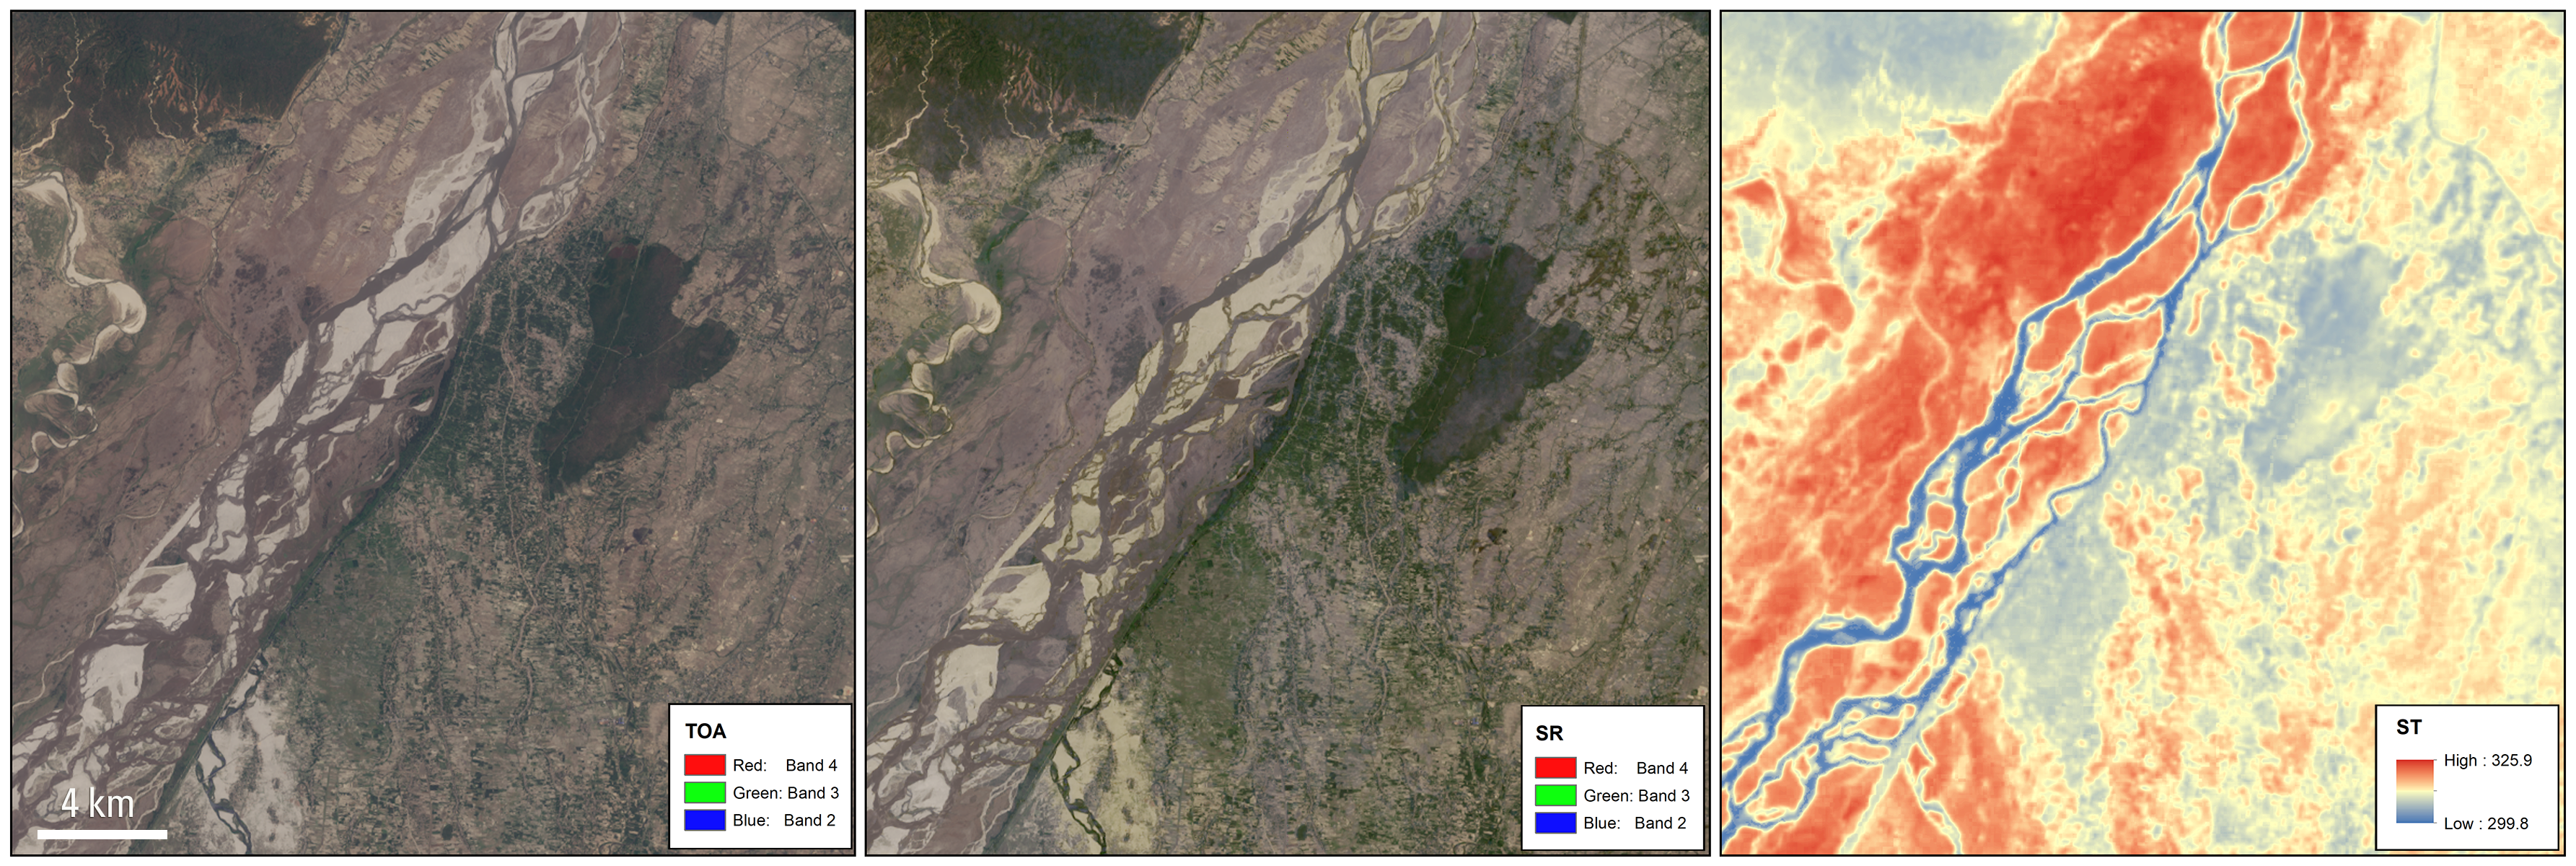 Three unique Landsat 8 Collection 2 images. In order from left to right: Level-1 Top of Atmosphere reflectance image (no atmospheric correction), Level-2 atmospherically corrected surface reflectance and Level-2 surface temperature. Images were collected on May 3, 2013 over the Sapta Kosh River in Bairawa, Nepal [@bouchard_example_2013]. Public domain.